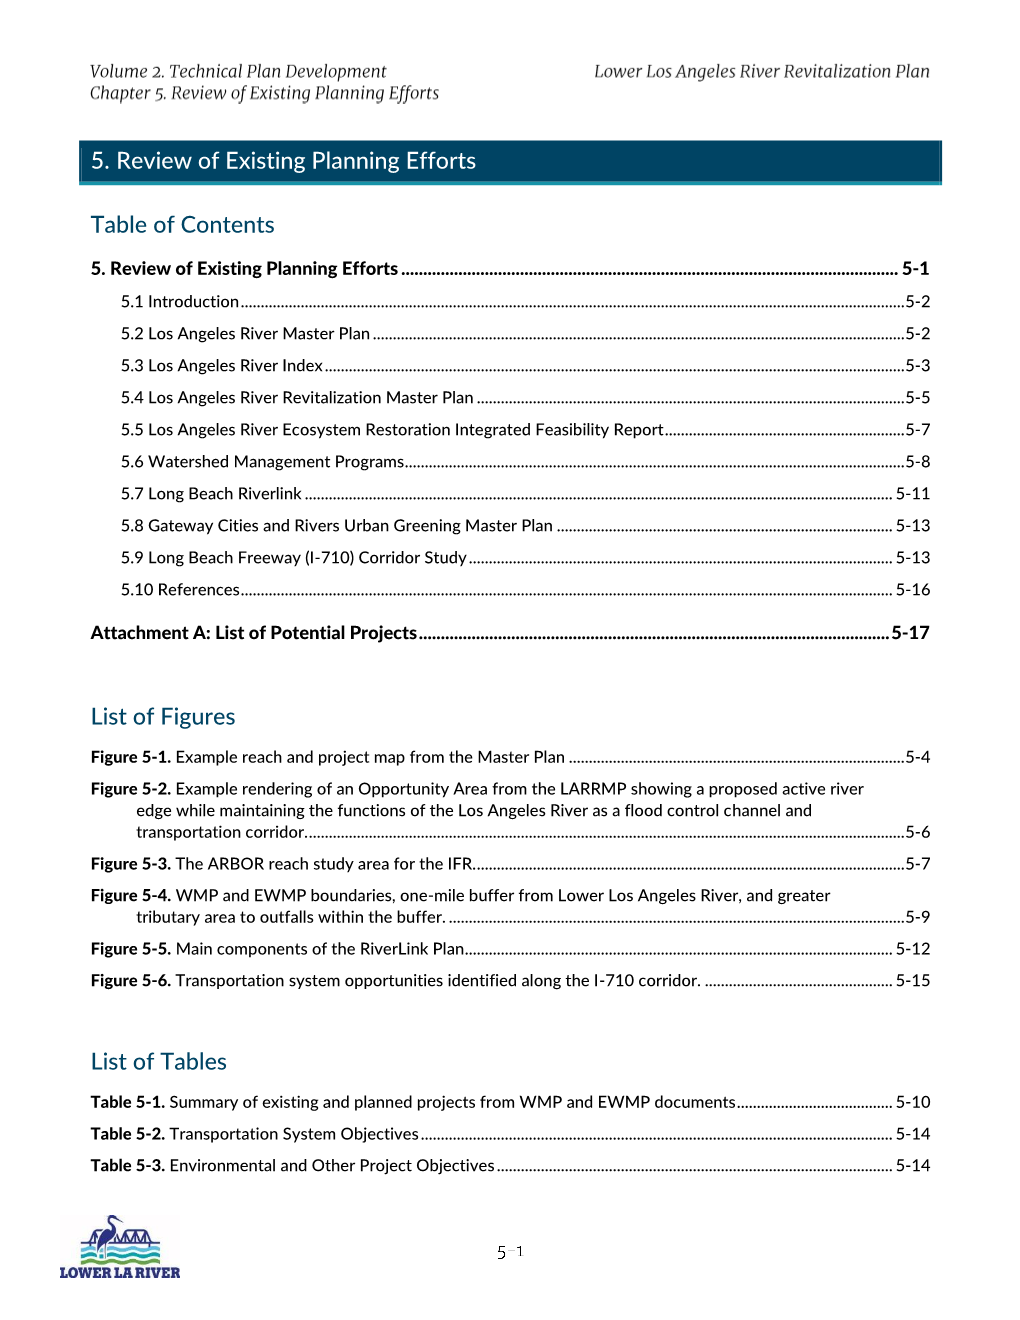 5. Review of Existing Planning Efforts Table of Contents List of Figures List of Tables